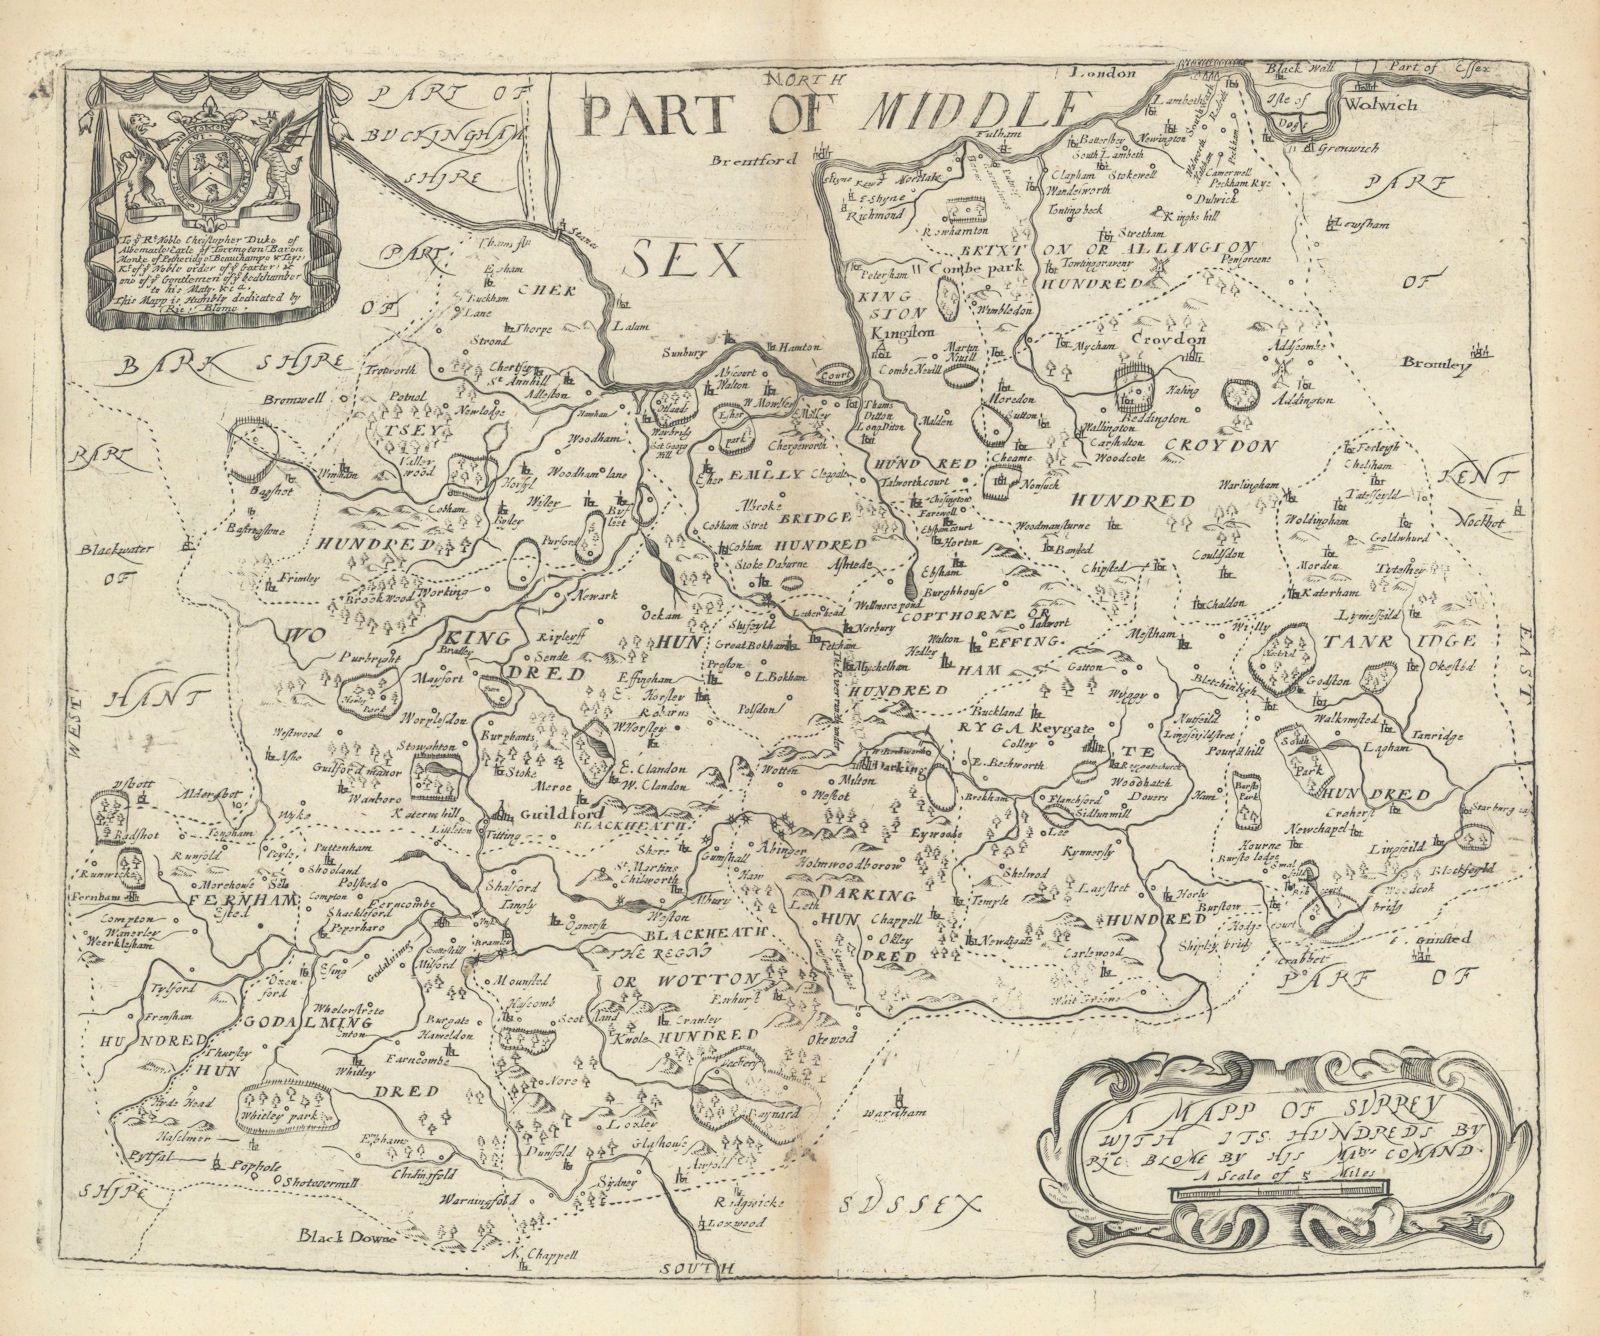 Associate Product A Mapp of Surrey with its Hundreds by Richard Blome 1673 old antique chart